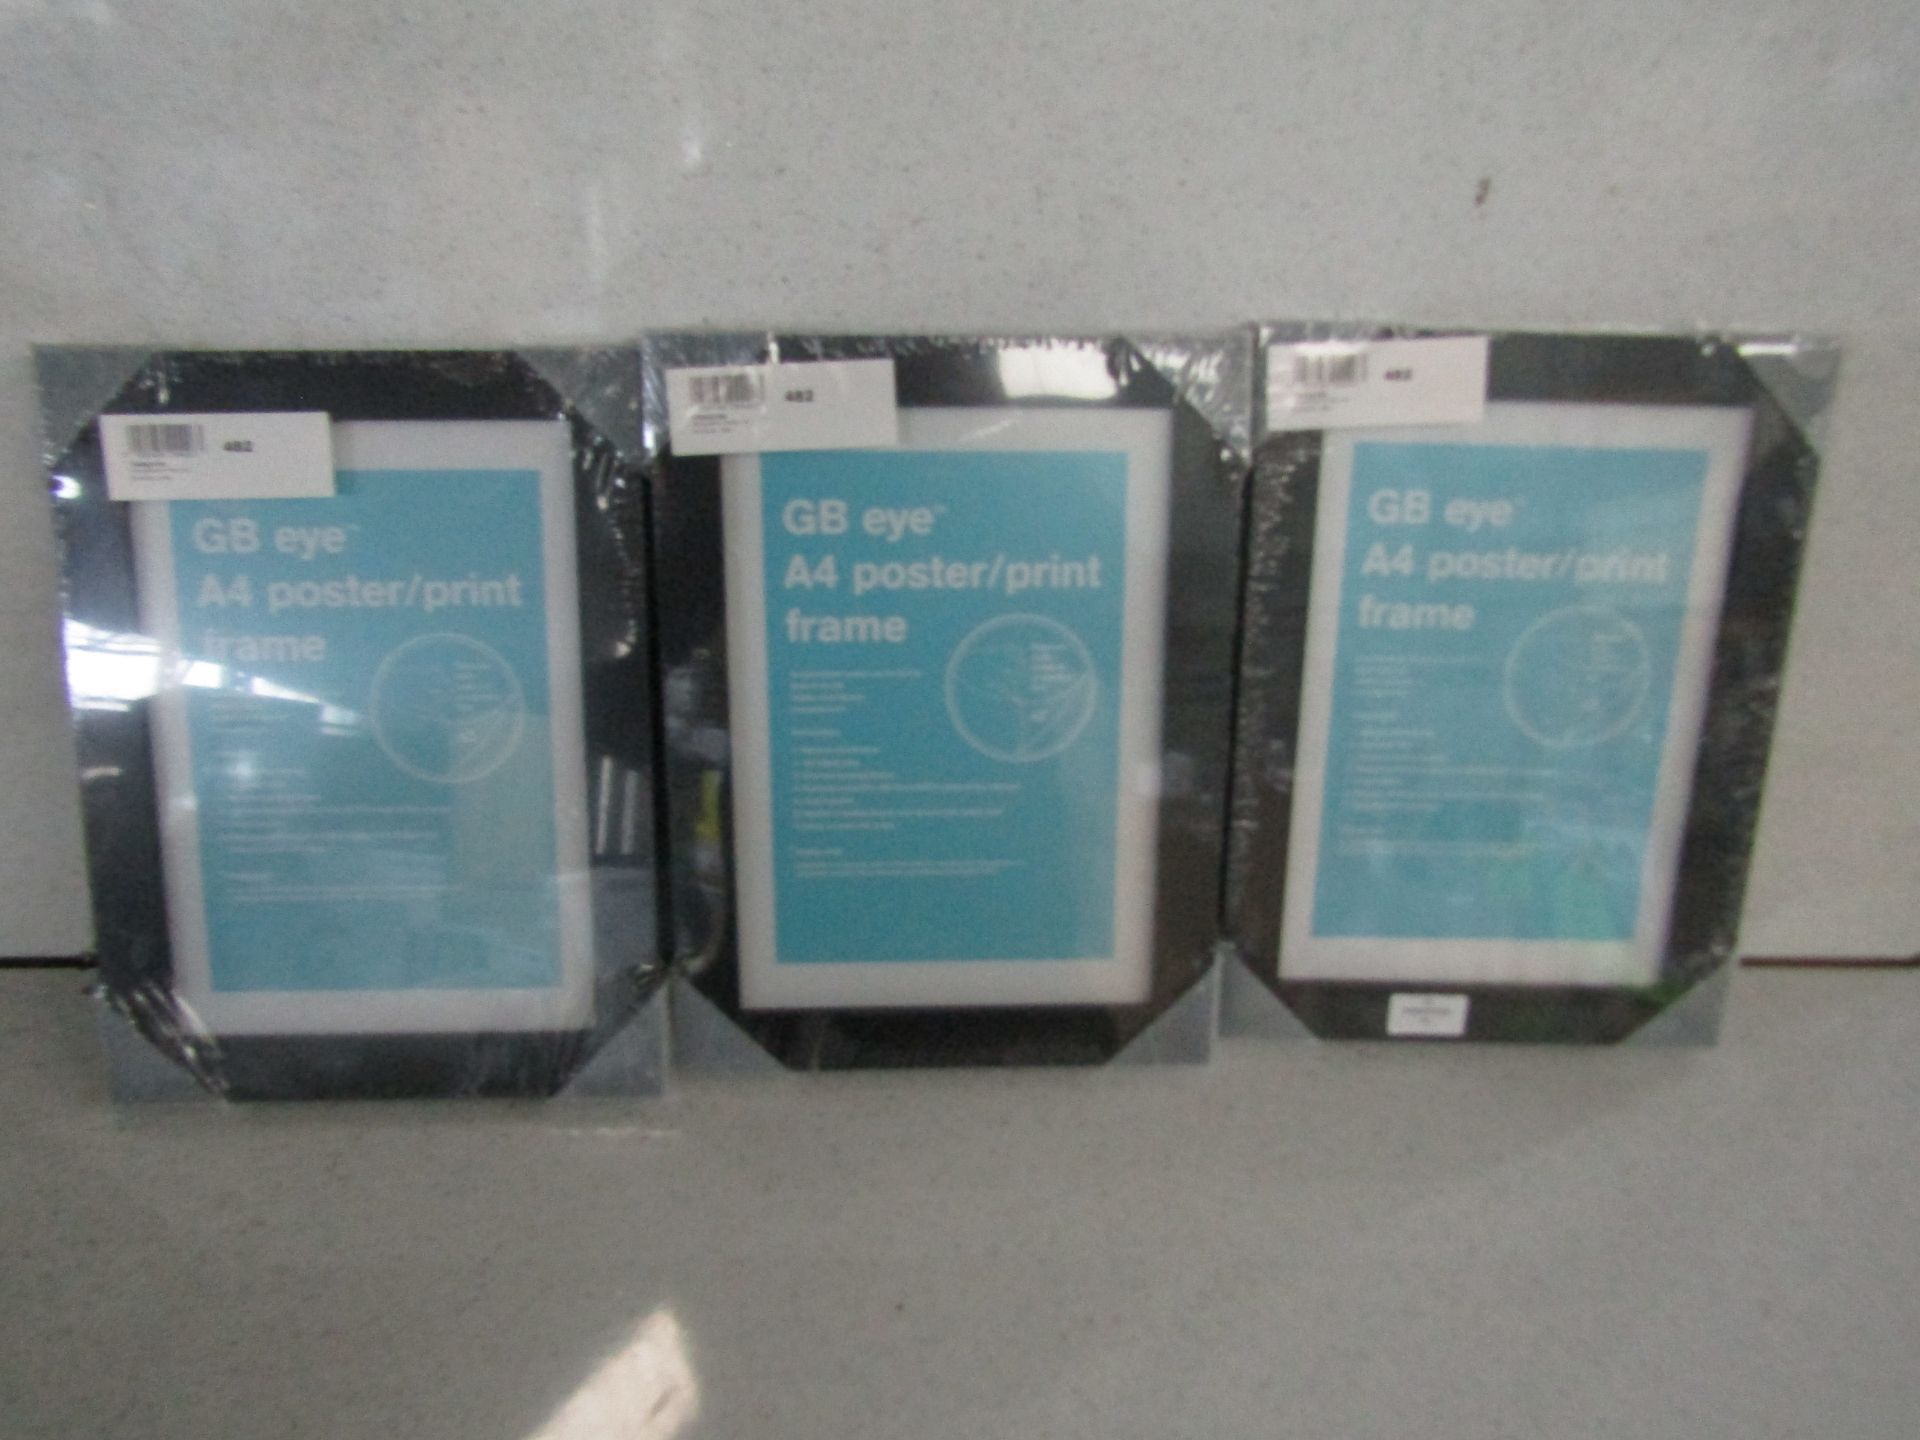 3x A4 Black Photo Frames - All Packaged.